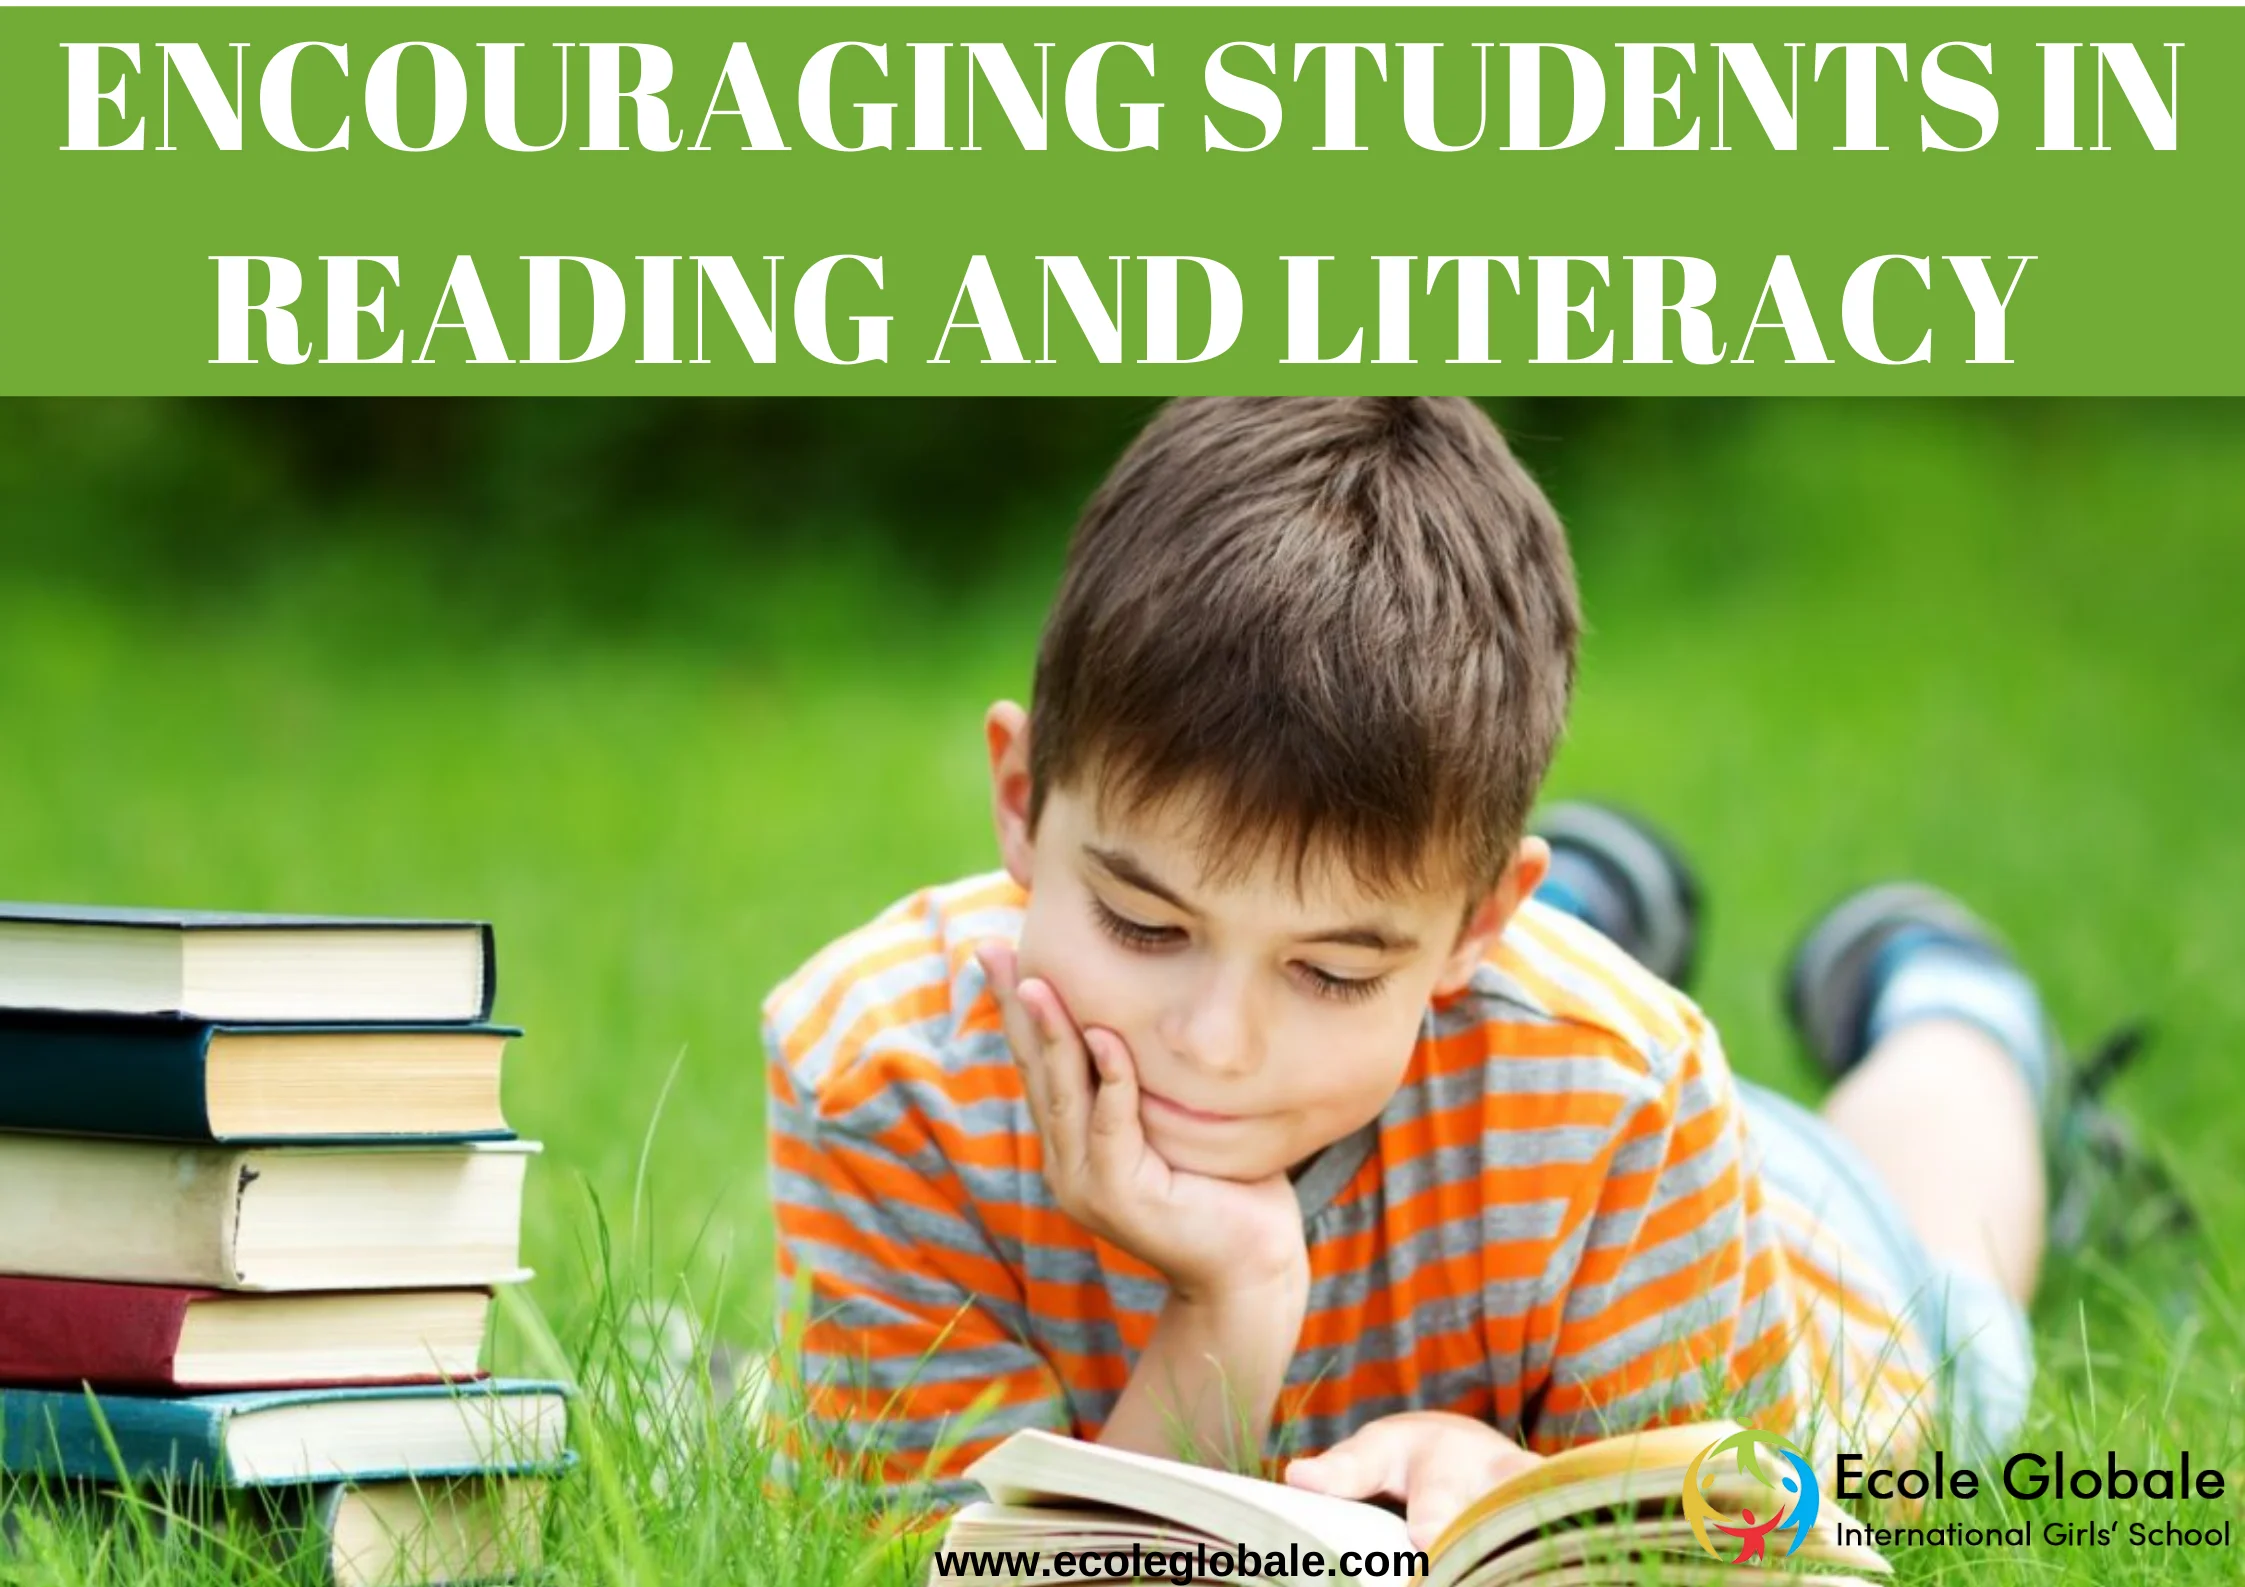 You are currently viewing ENCOURAGING STUDENTS IN READING AND LITERACY